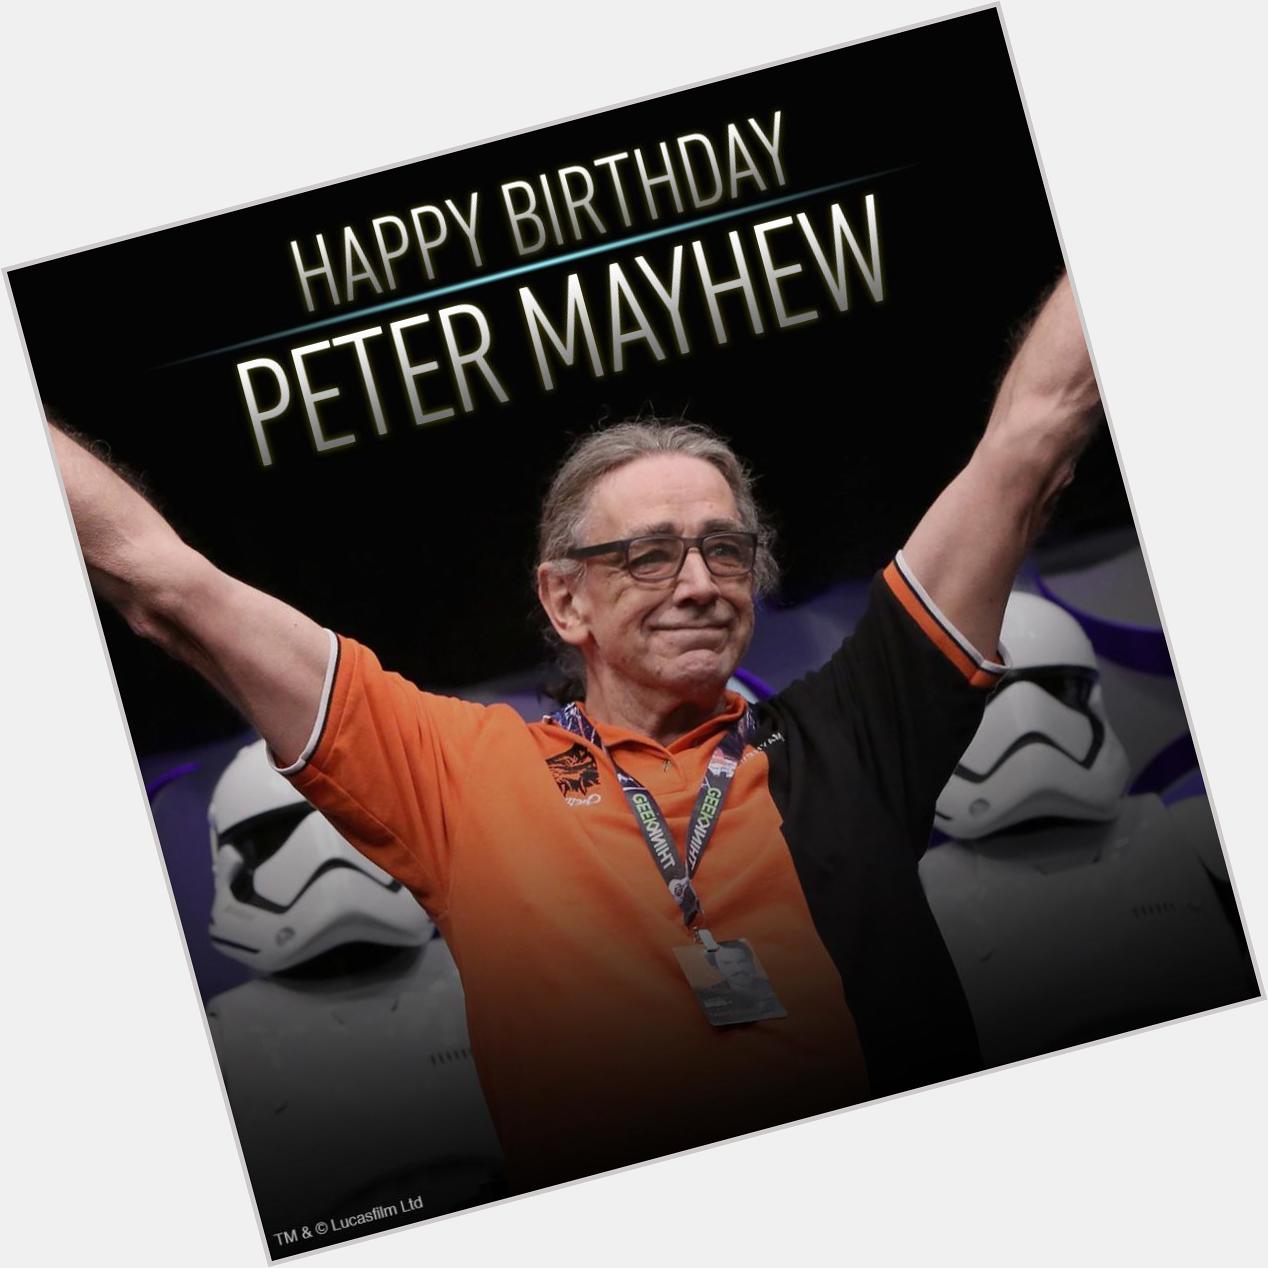 Happy birthday to our favorite giant fuzzball Wookiee, Peter Mayhew! 